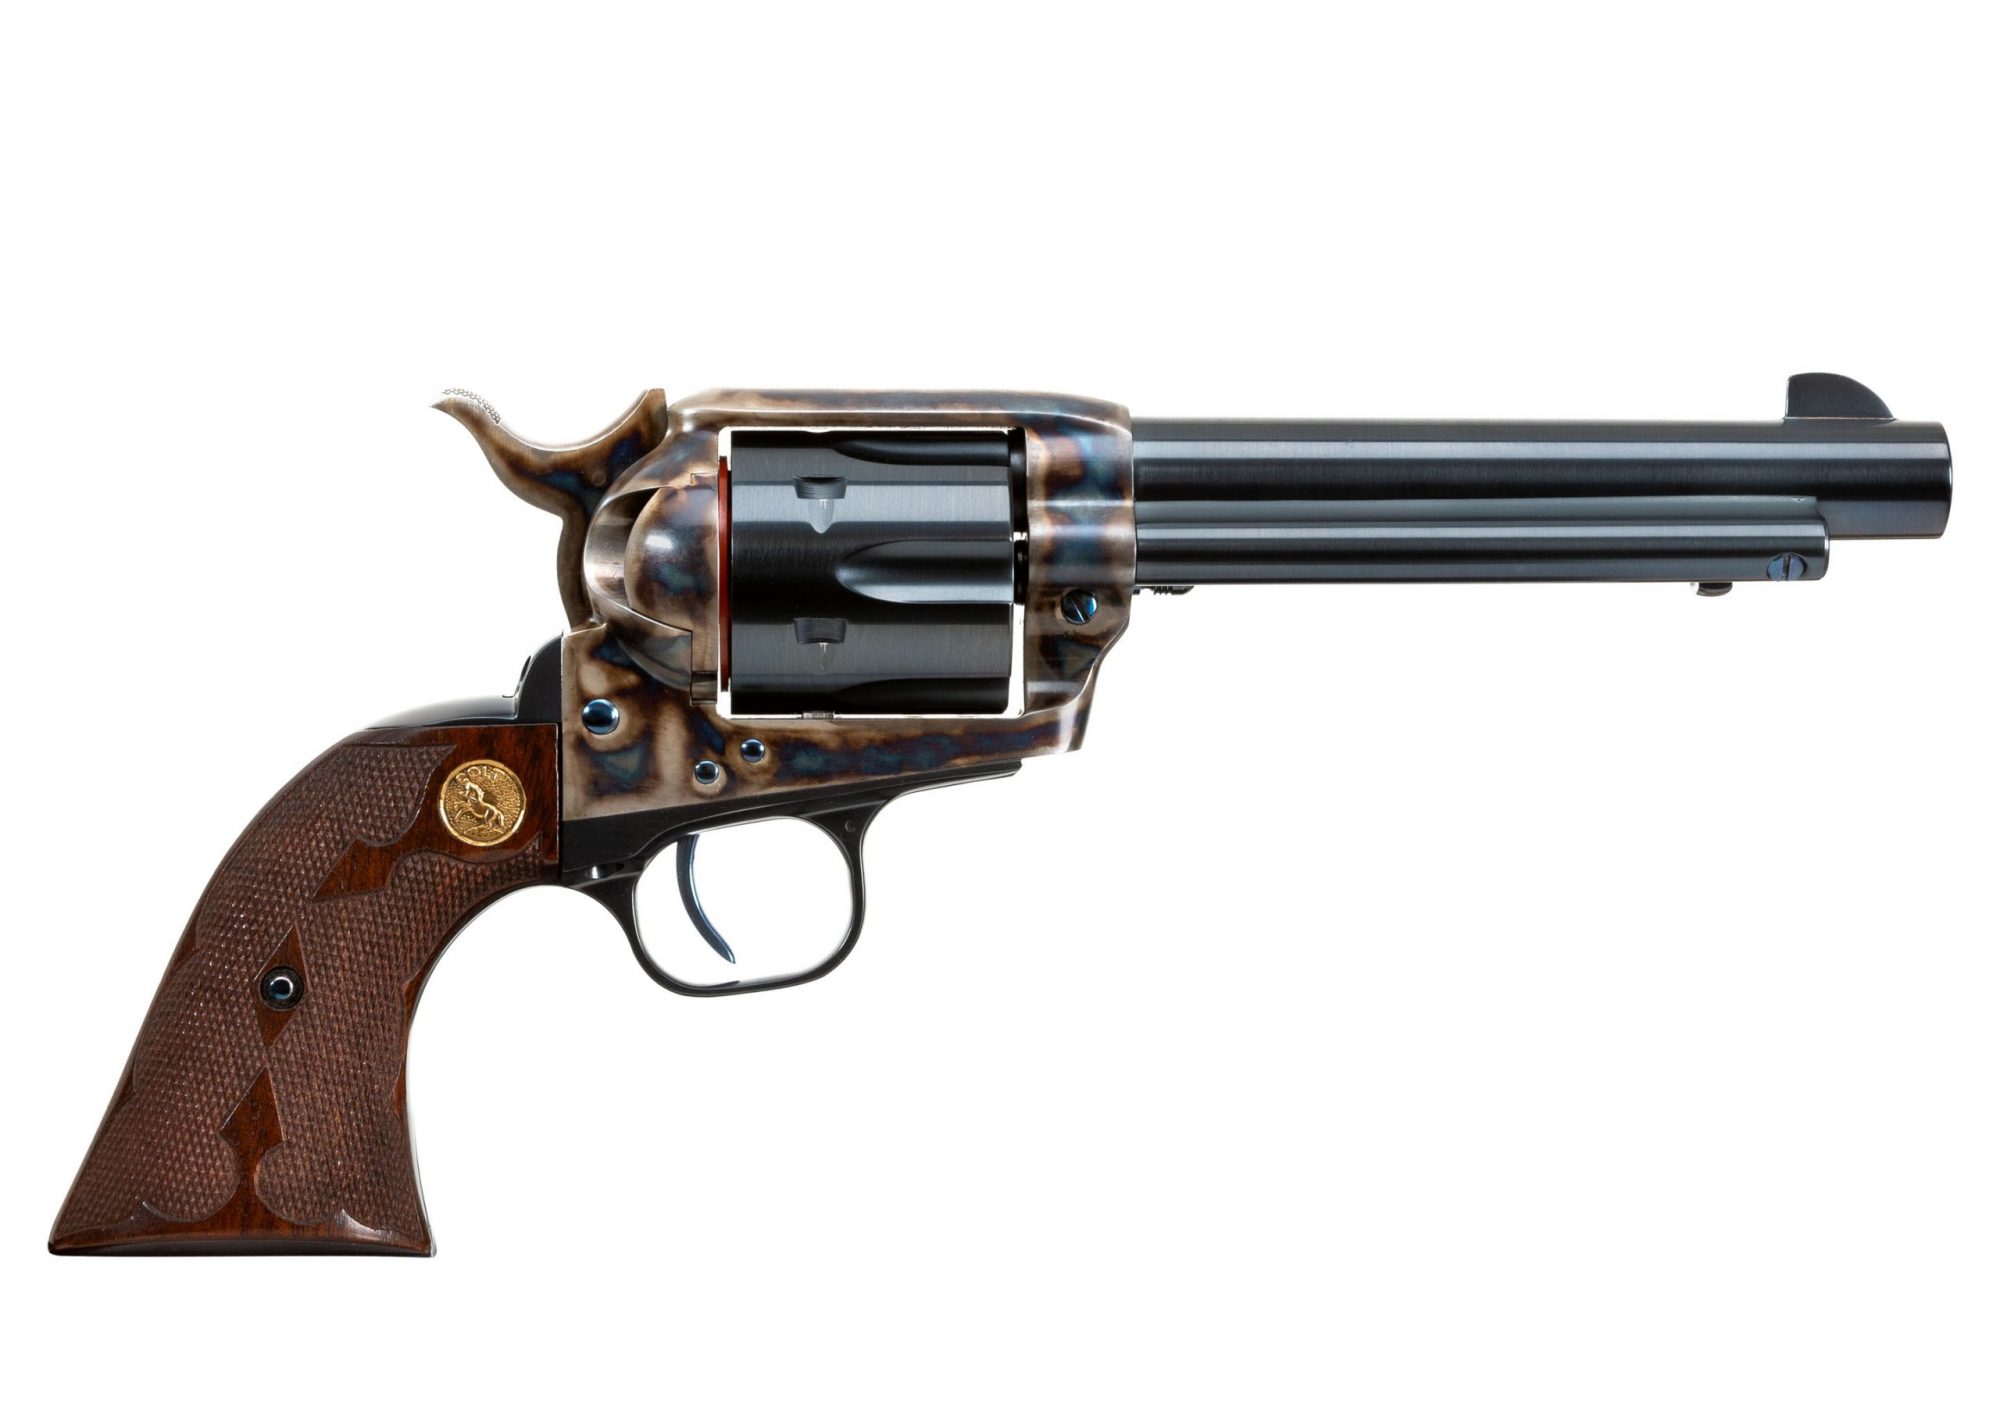 Photo of a SASS Third-Generation Colt SAA, featuring restoration-grade metal finishes by Turnbull Restoration of Bloomfield, NY